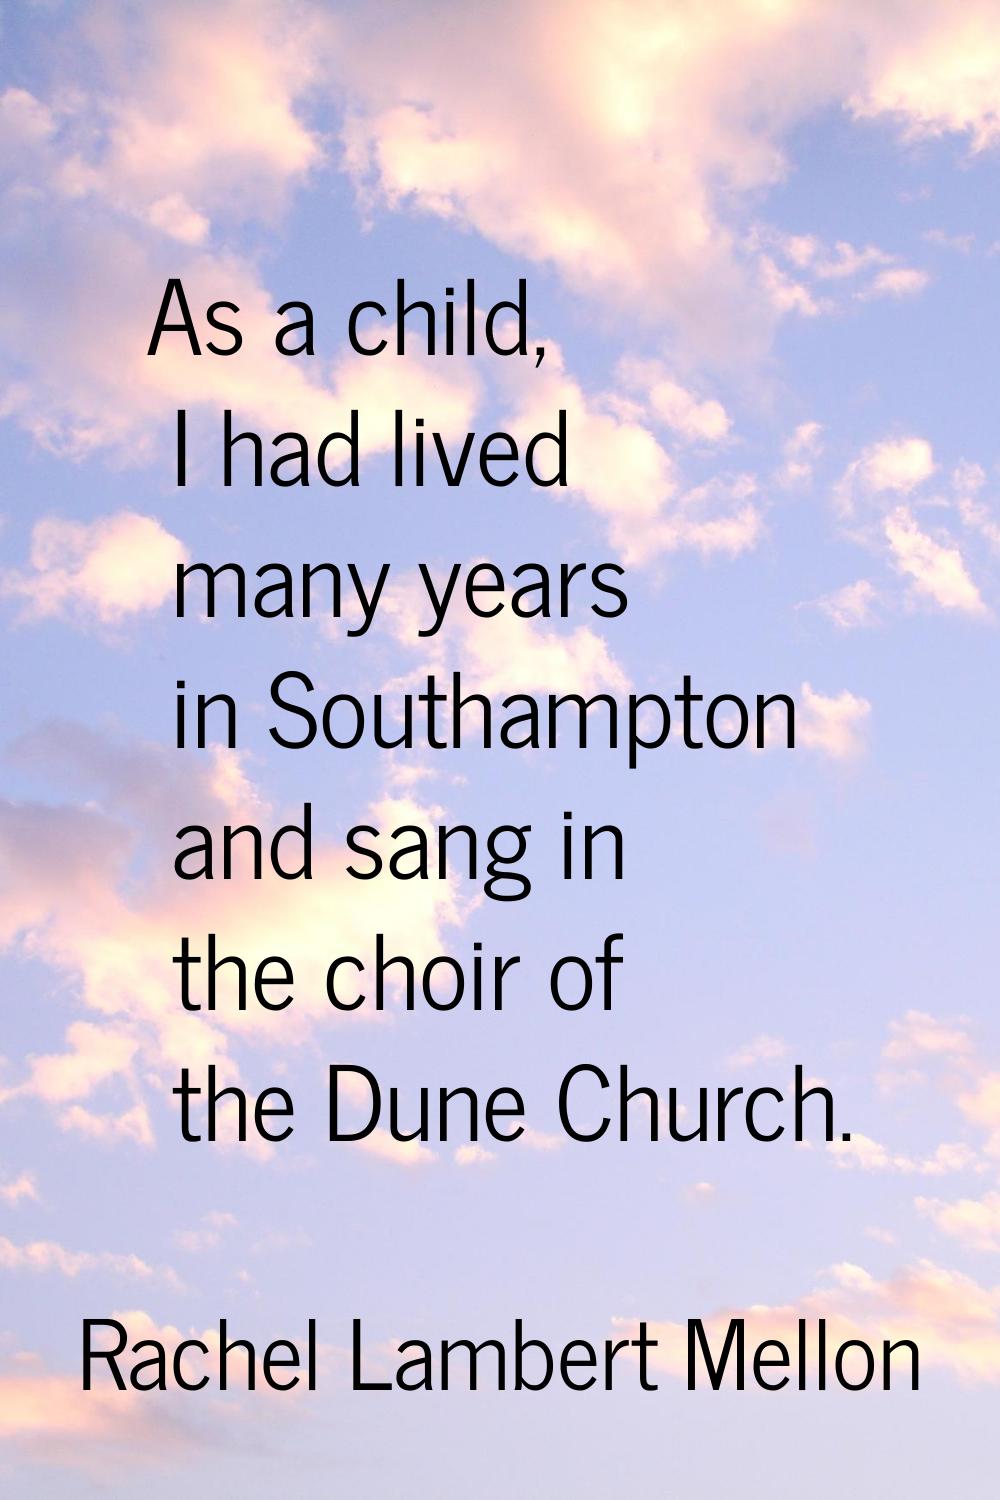 As a child, I had lived many years in Southampton and sang in the choir of the Dune Church.